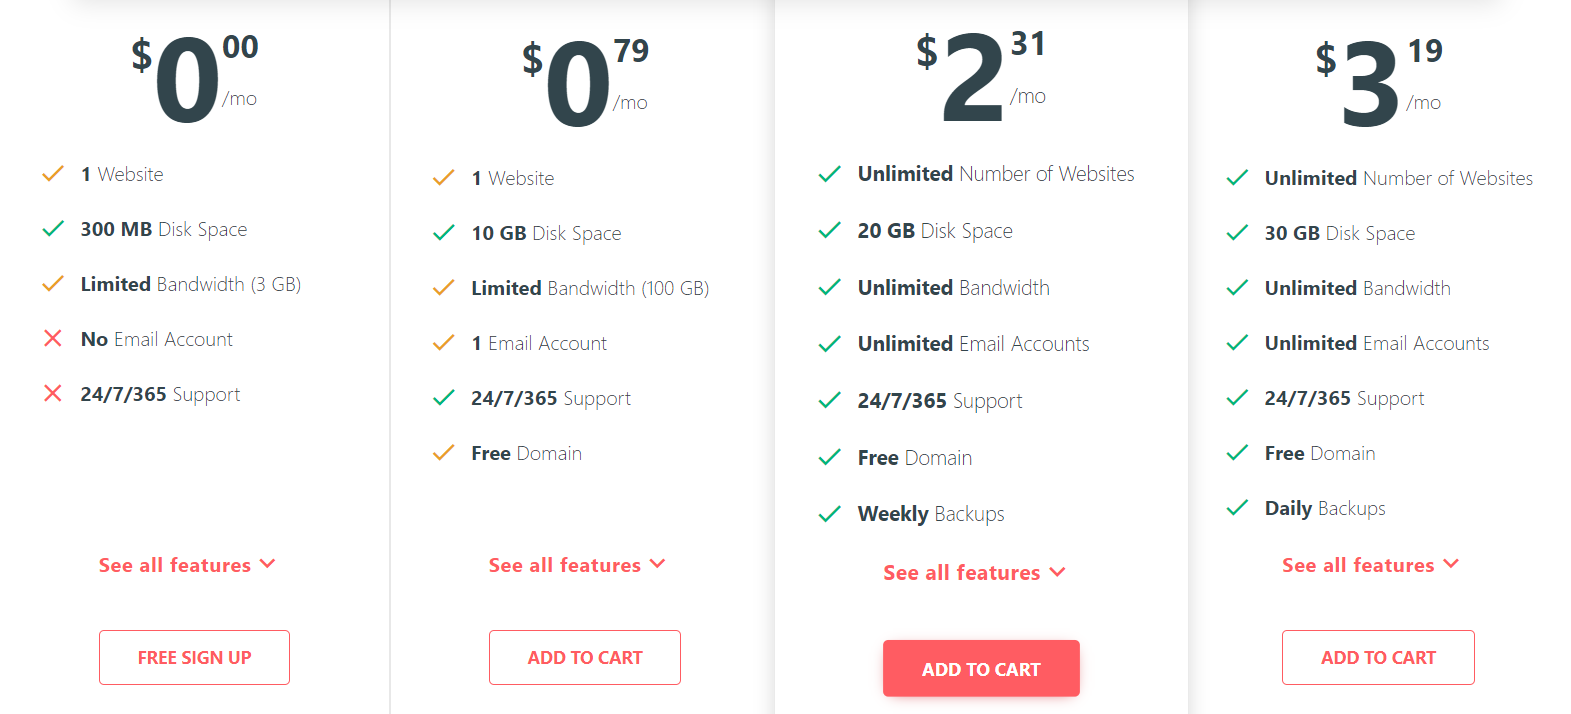 000webshosting pricing page